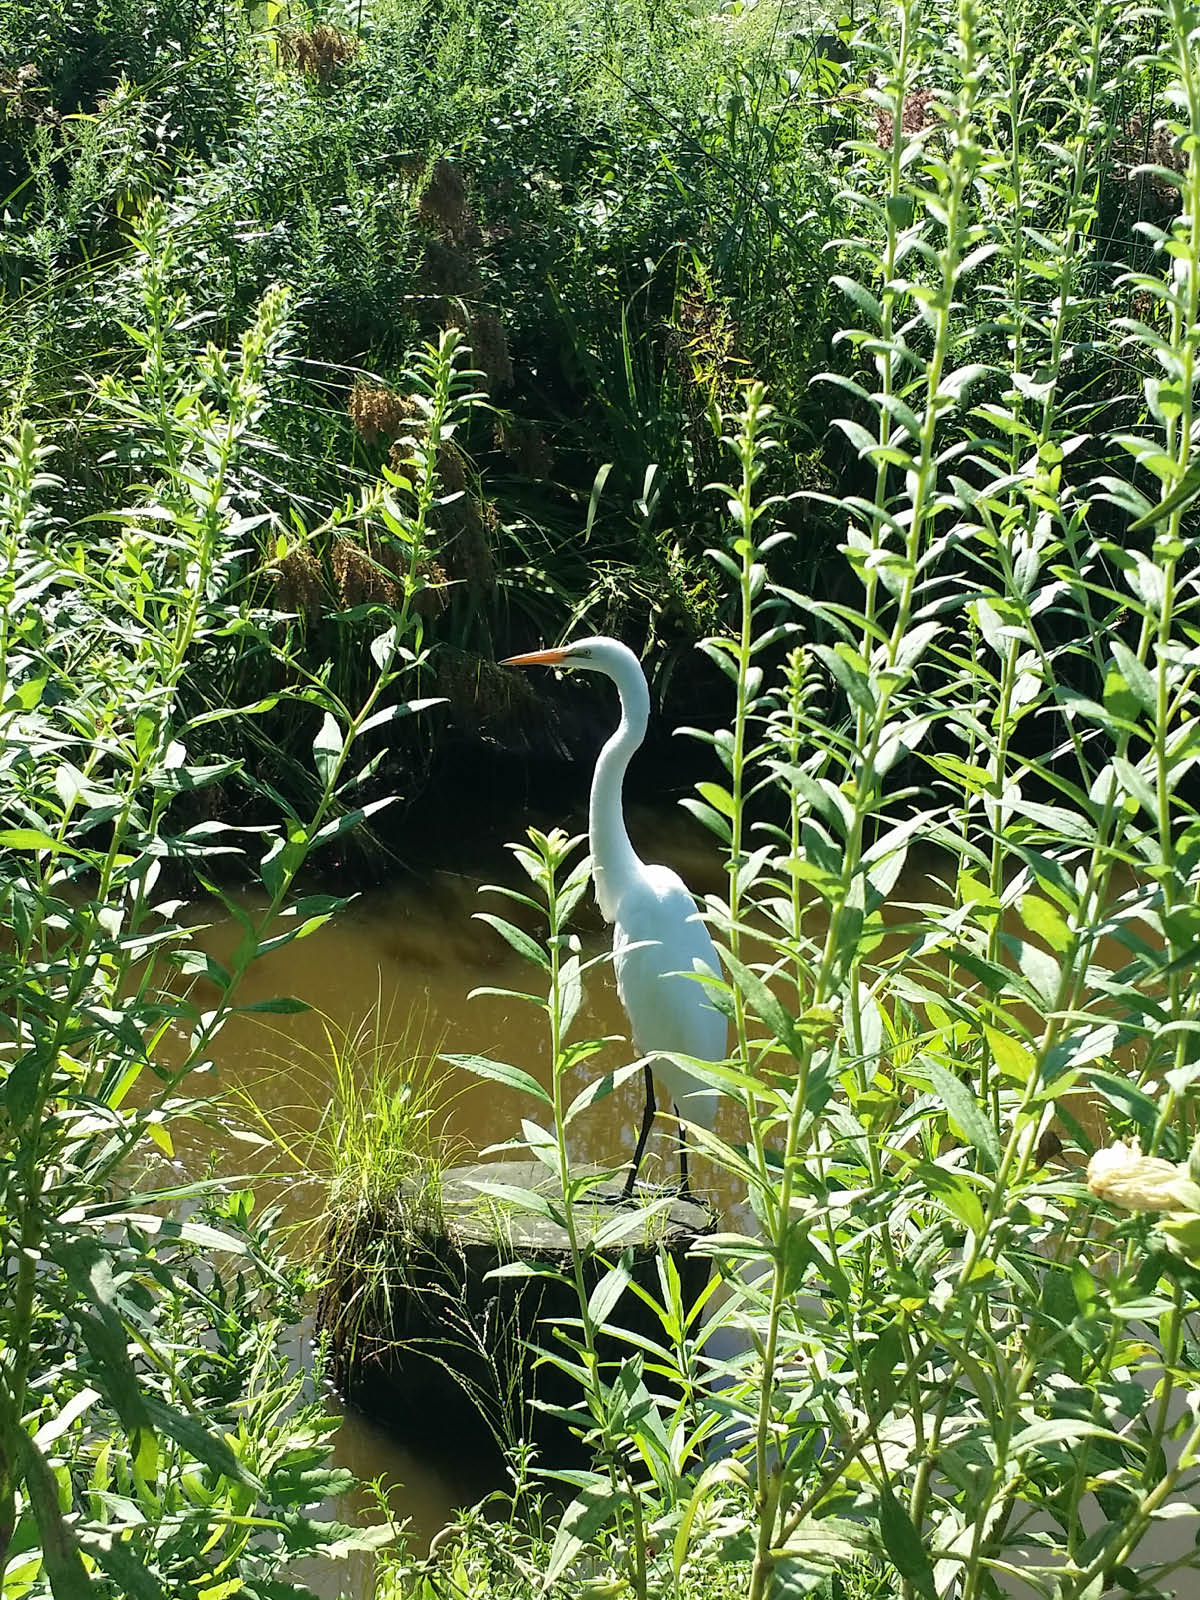 Great egret seen on a log in the water surrounded by grasses.